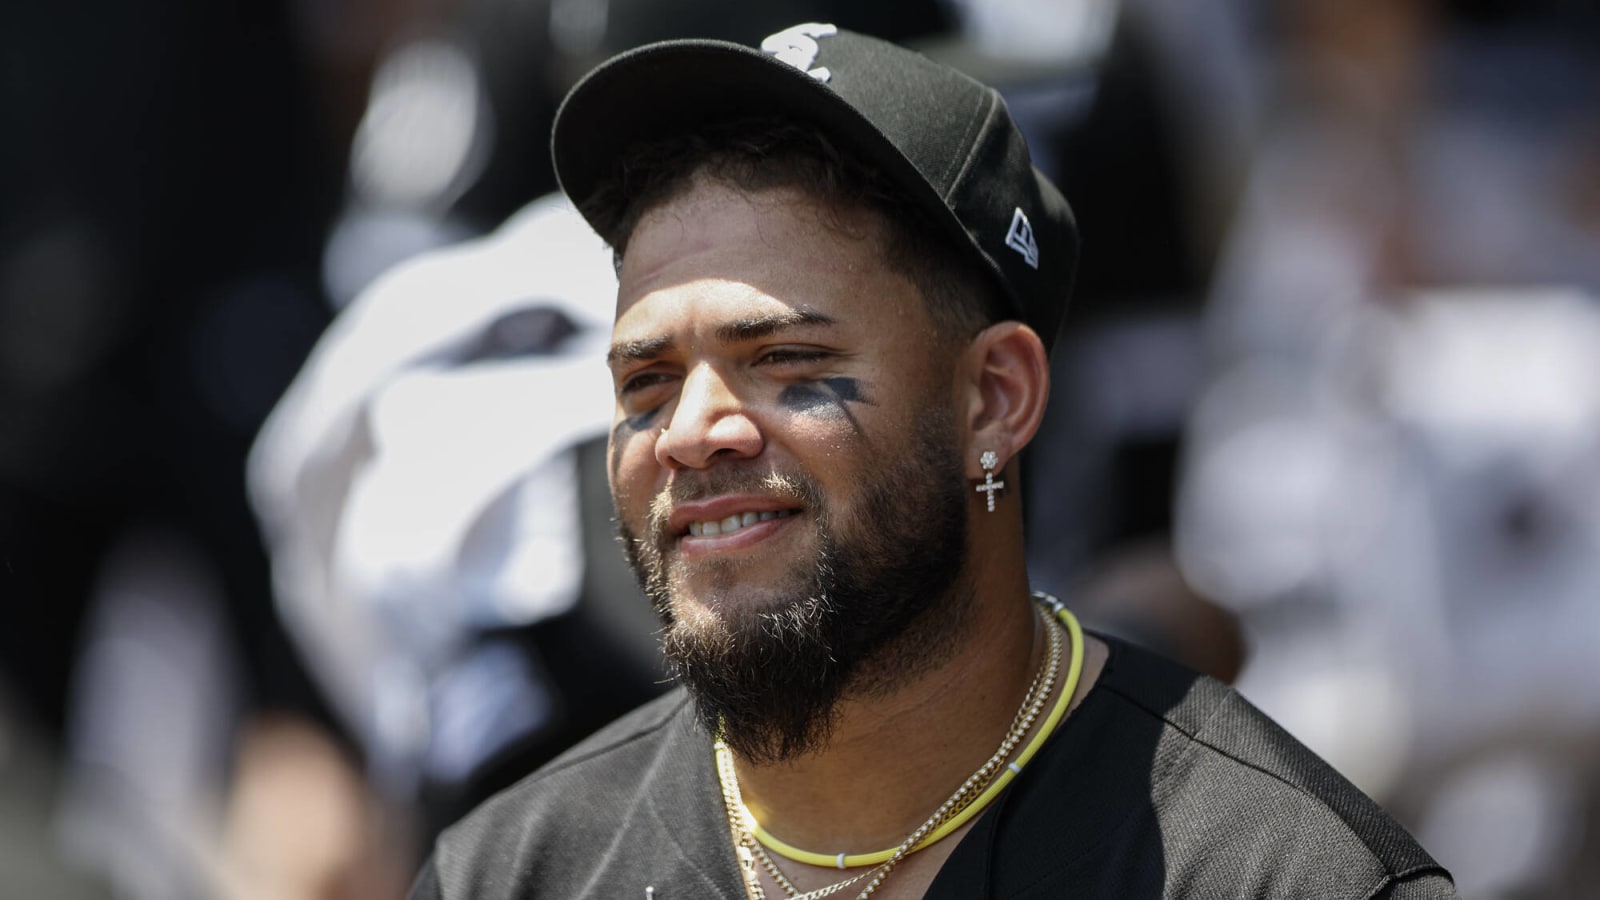 Yoan Moncada remains without a timetable for his return